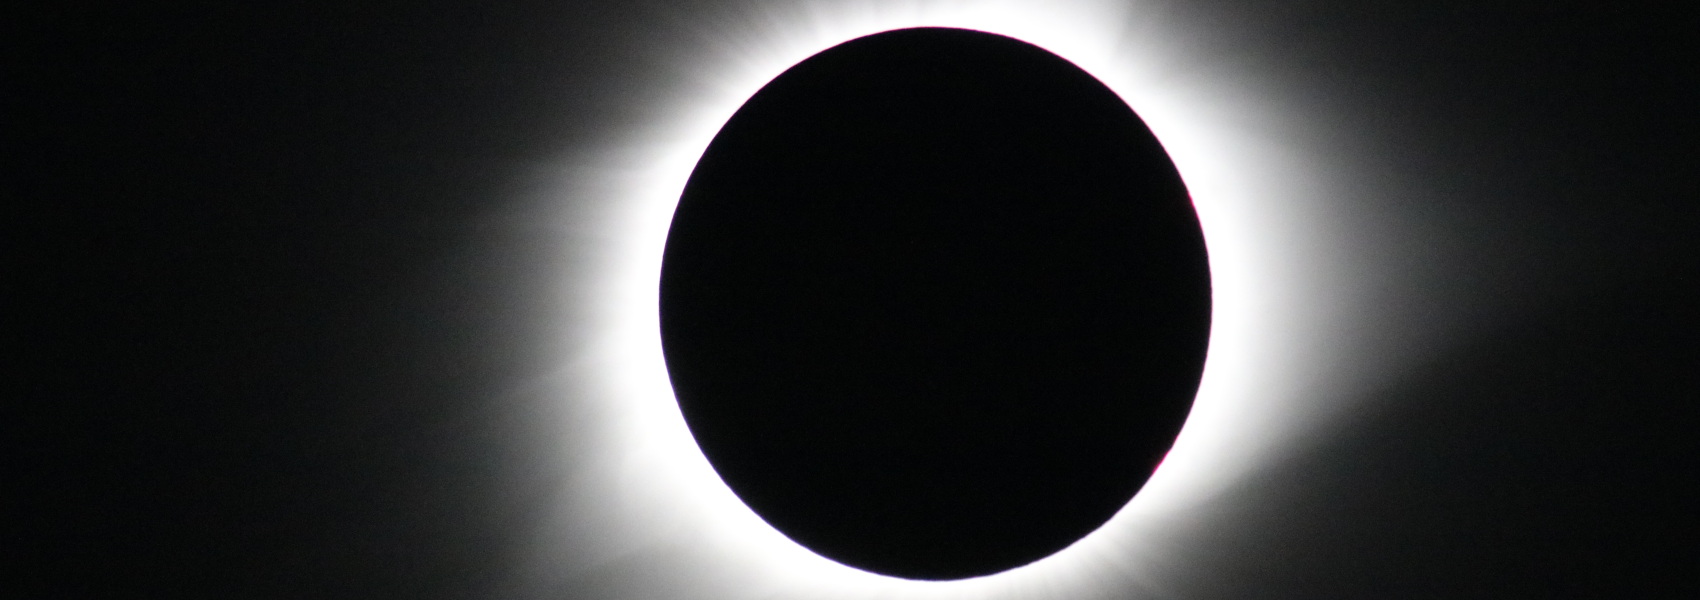 A black hole in a black sky surrounded by a white corona. It is a close crop of a photo of a solar eclipse.